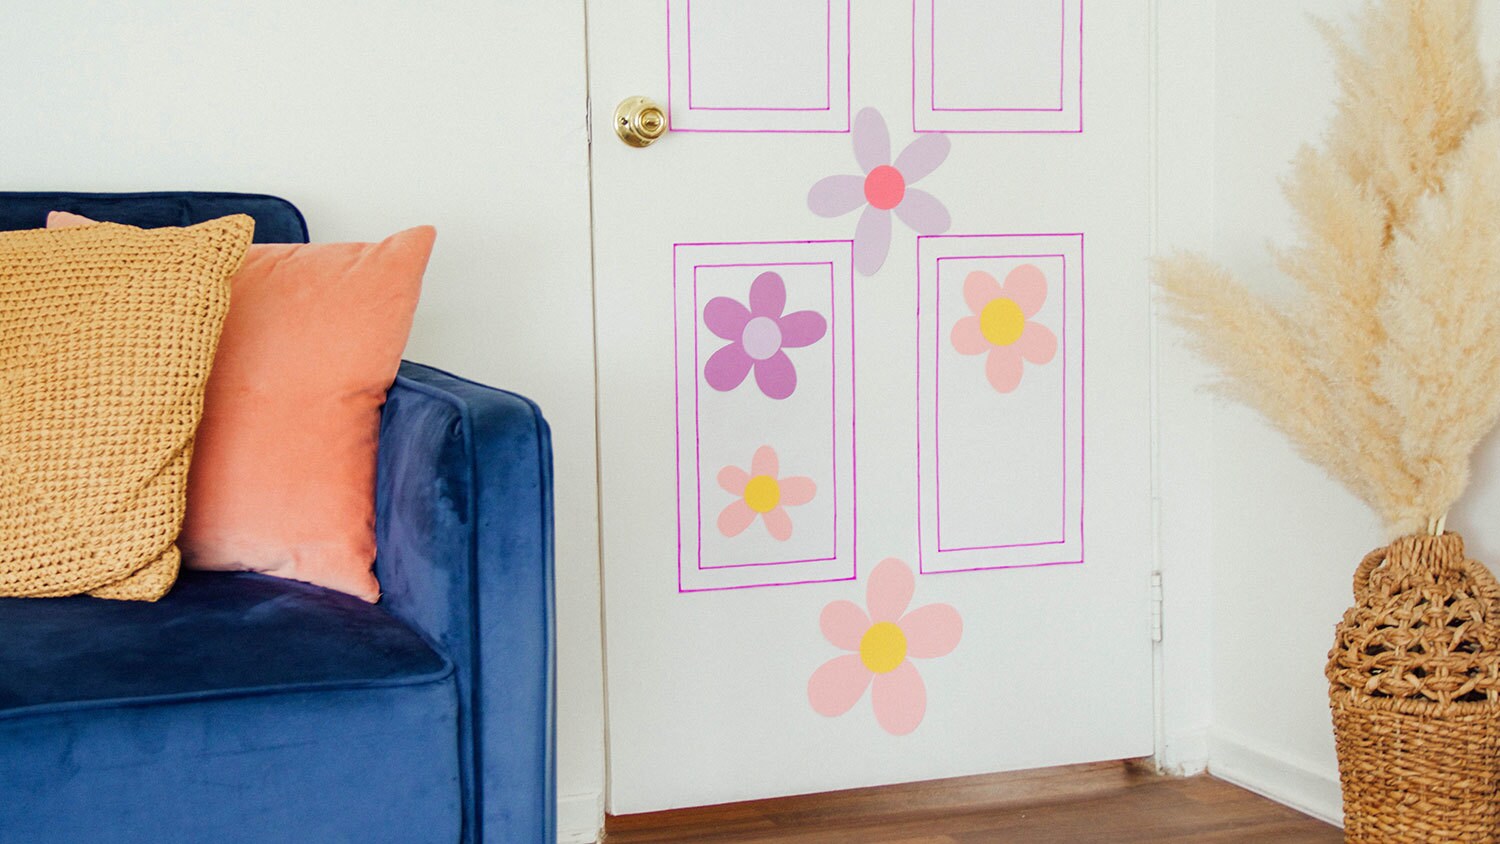 A real door made to look like Boo's door from Monsters, Inc., made with white and colorful construction paper.